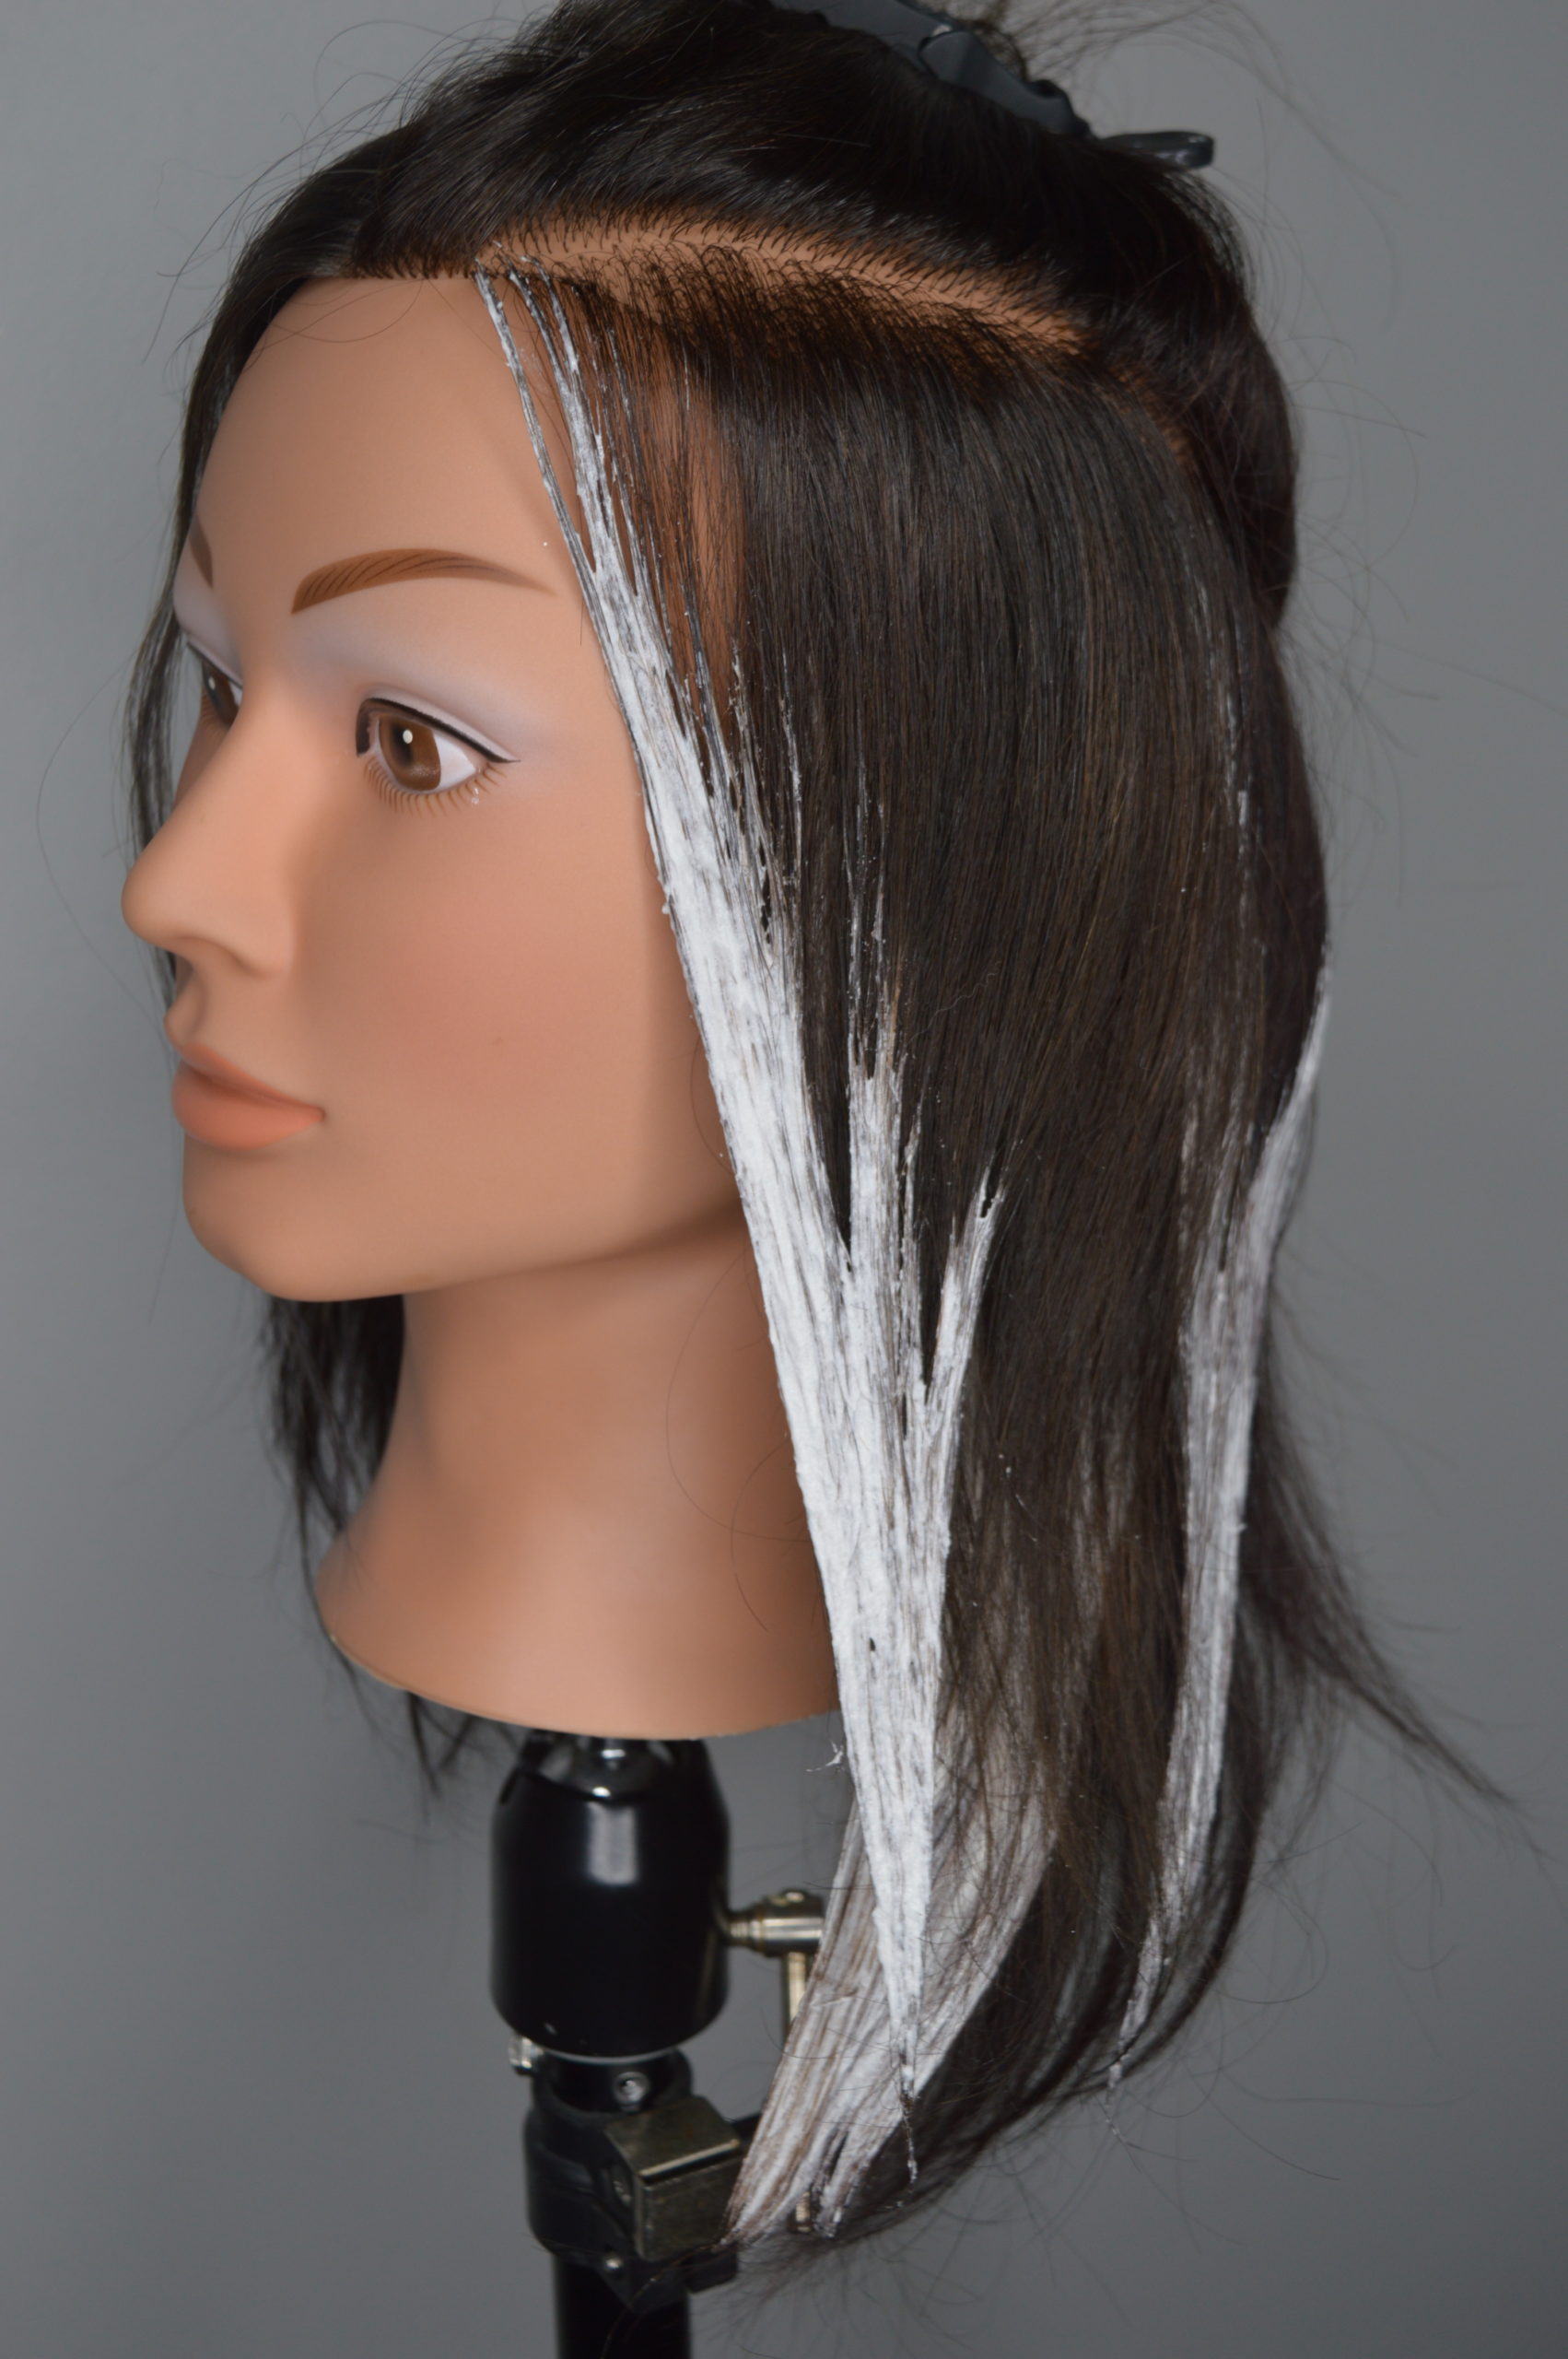 Lightener is applied to a large section of hair to form a half-V shape.